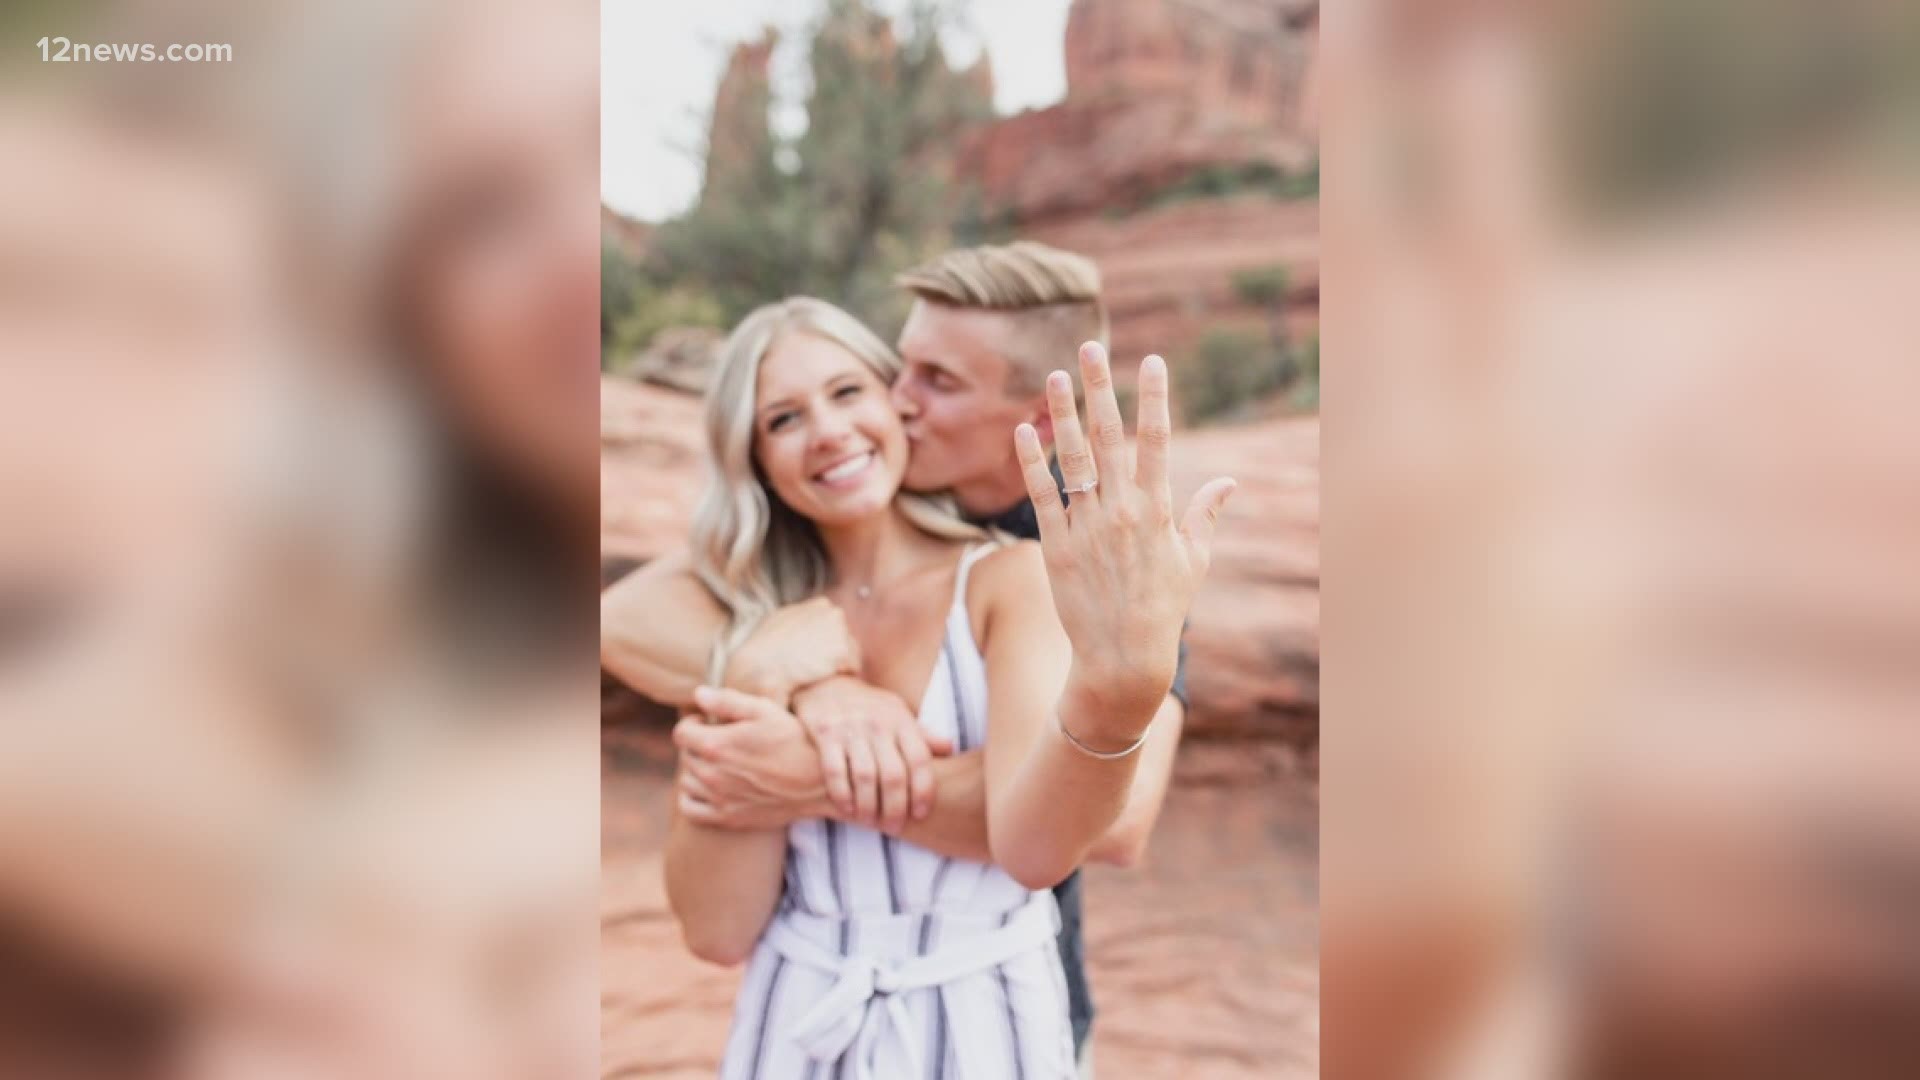 The Red Rocks are a magical place and even though this young man had to postpone his proposal, he pulled off quite the surprise for his bride-to-be.